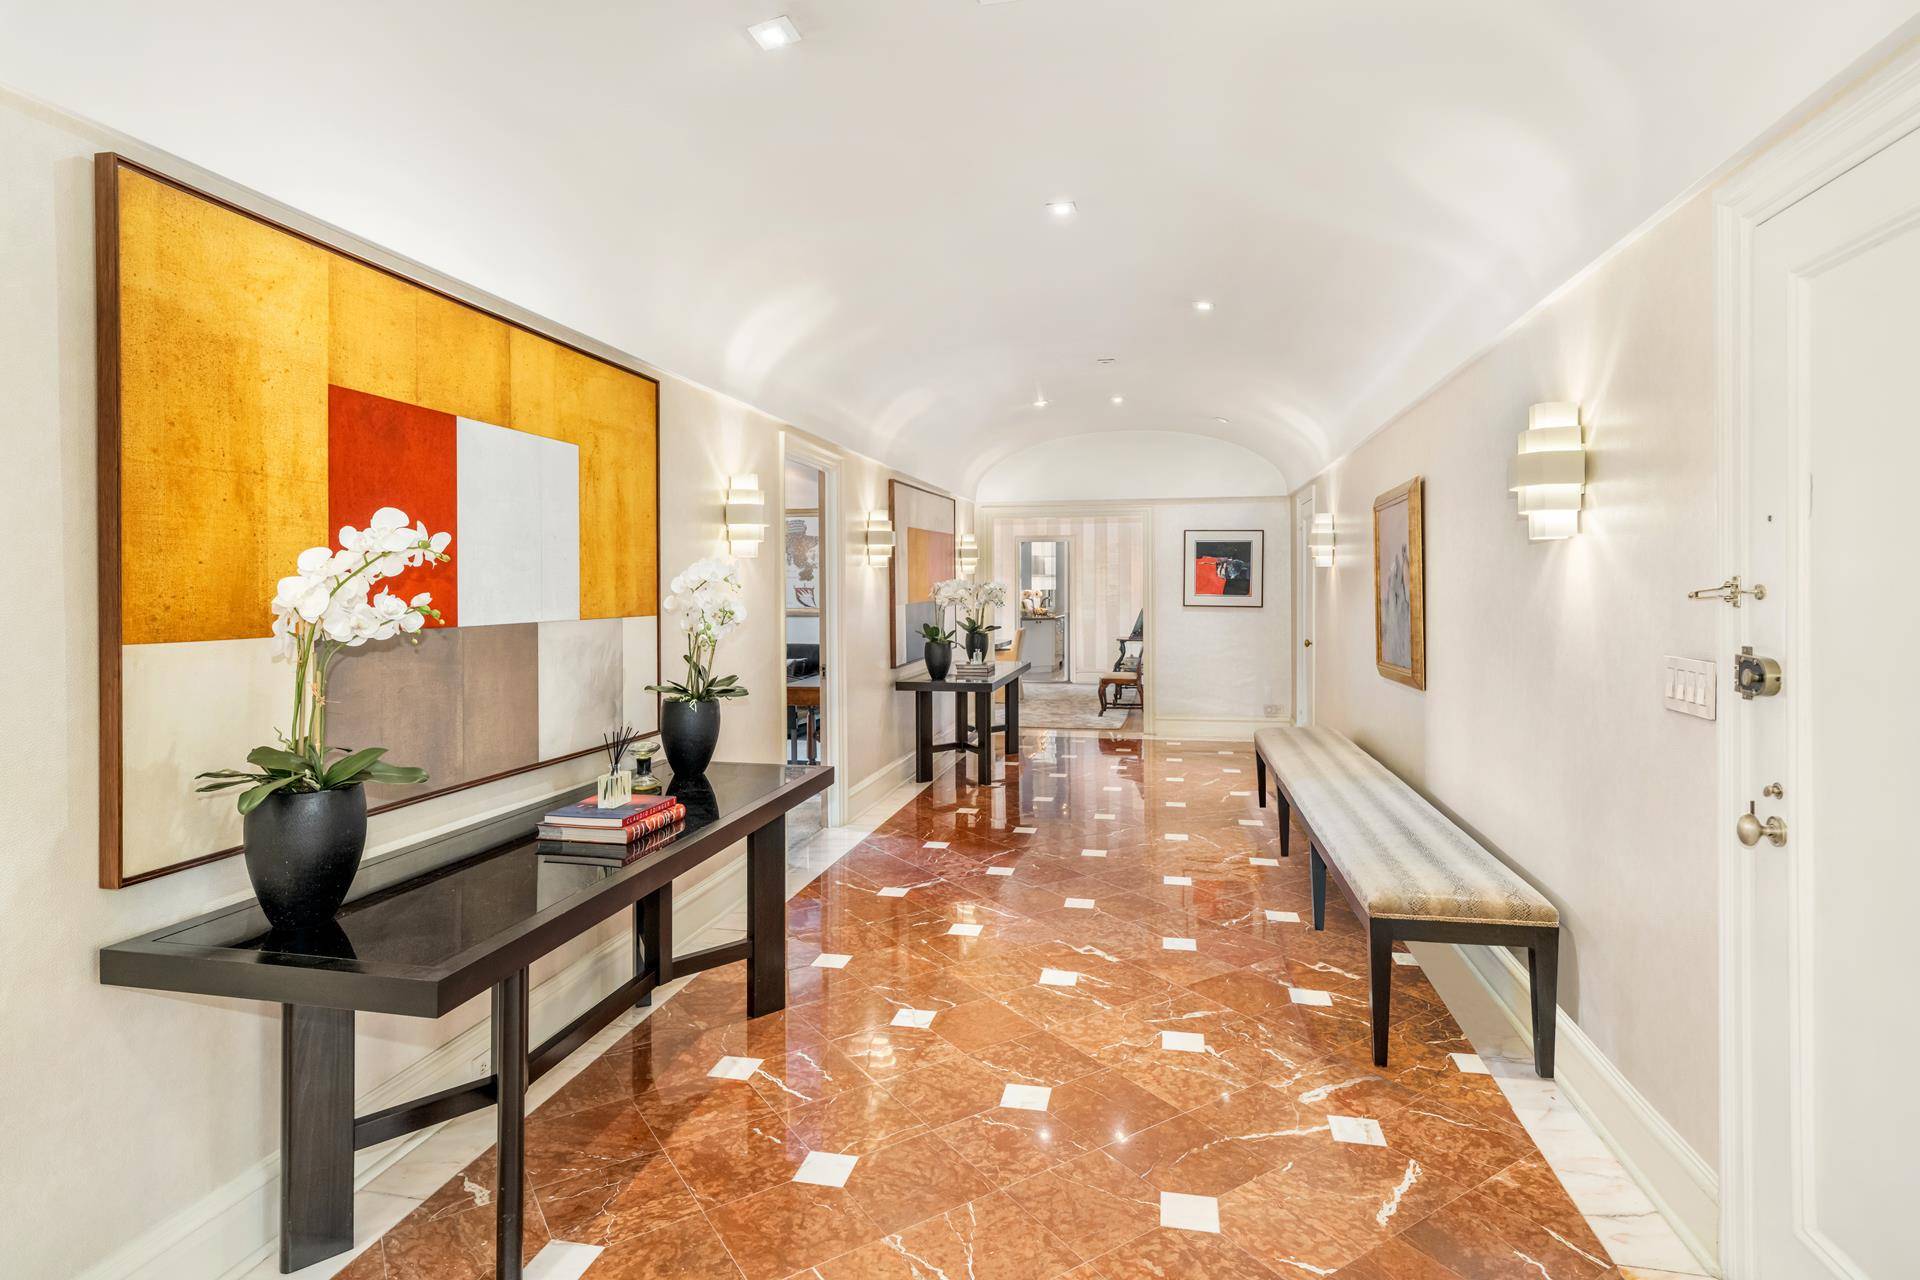 Welcome to 888 Park Avenue 6A, an exceptional 10 room residence in one of the most esteemed pre war cooperatives on Park Avenue.